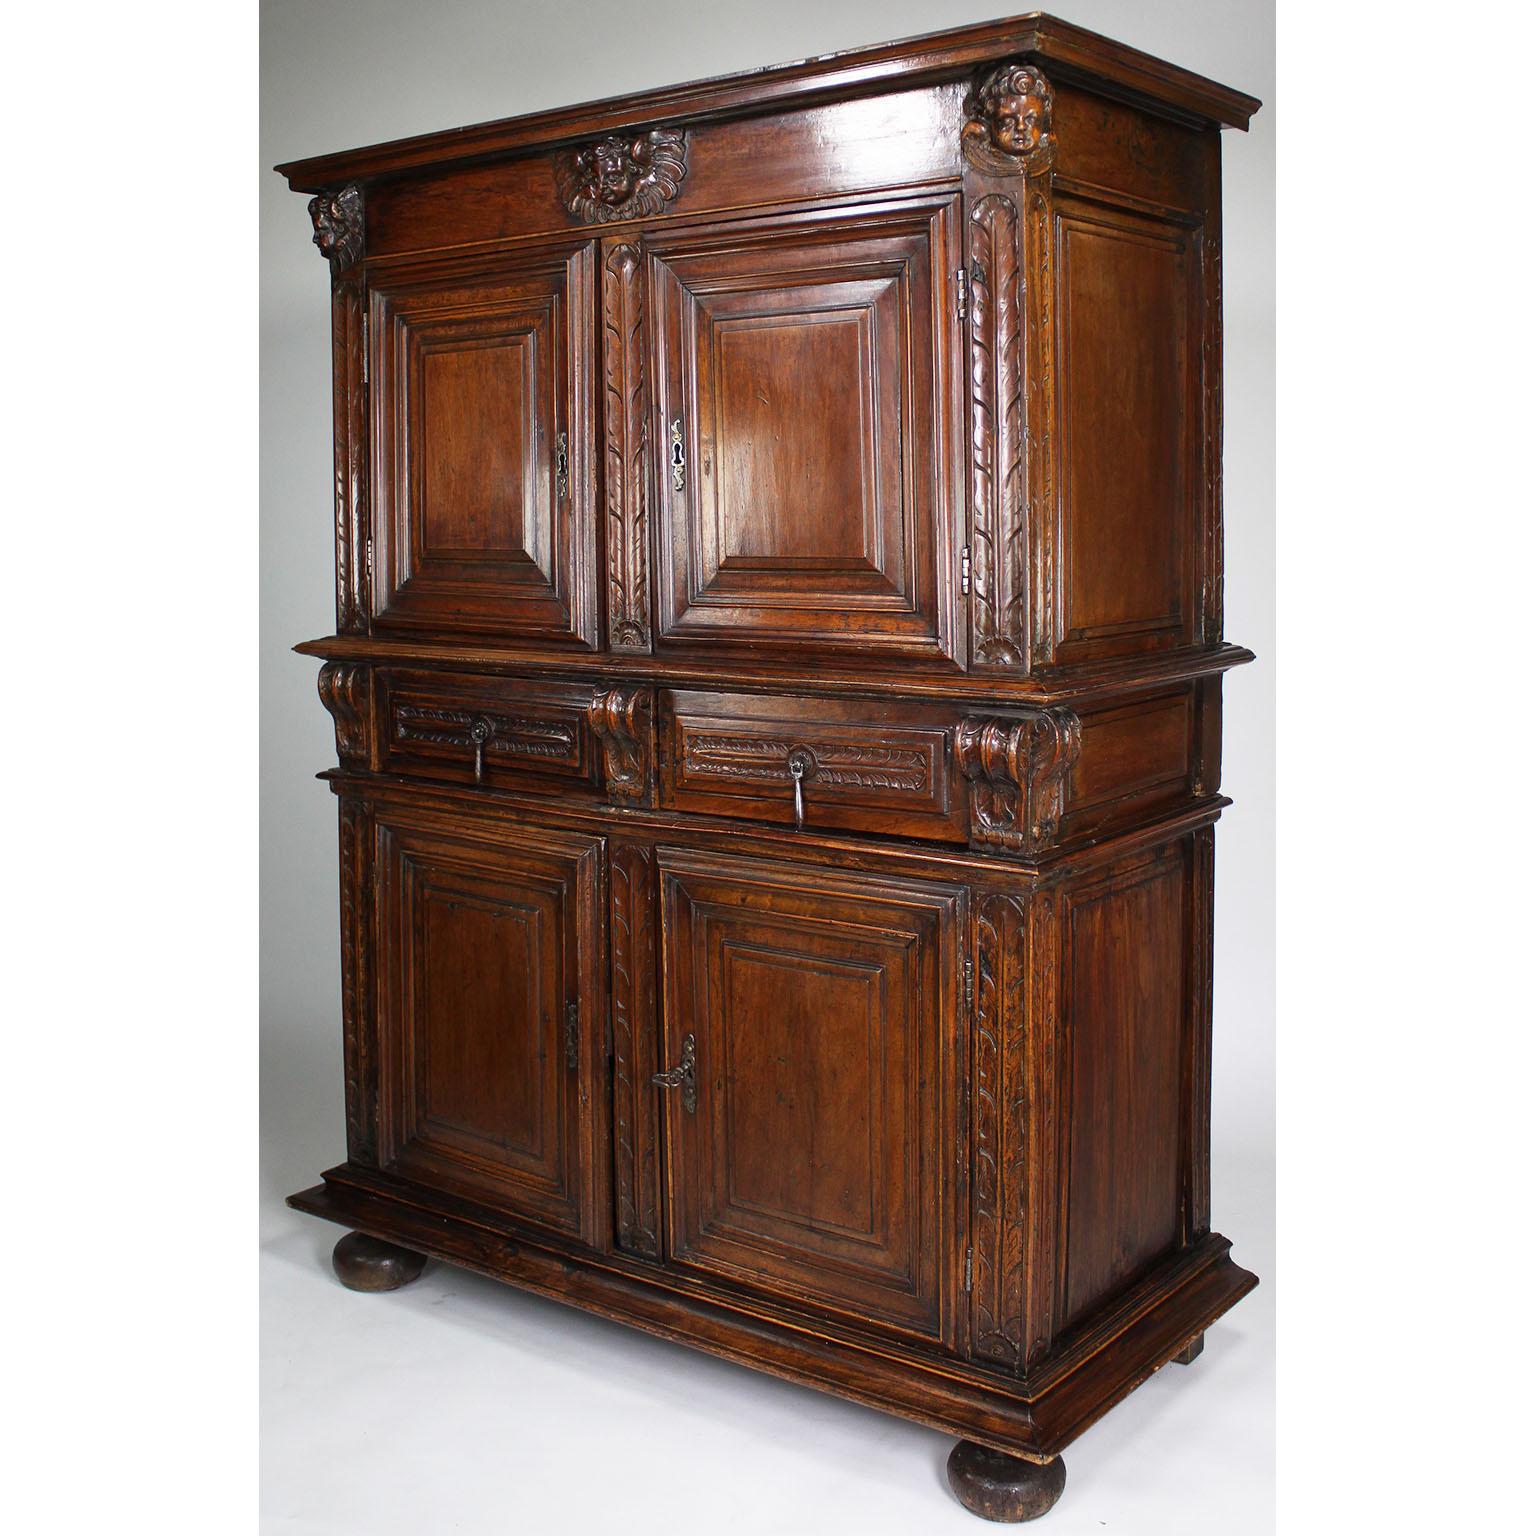 A 17th-18th Century French/Italian Renaissance Walnut Figural Carved Credenza Cabinet or Cupboard. The two-part cabinet with a pair of upper coffered doors with metal key-hole hardware below carved figure of cherub-heads, the apron with a pair of